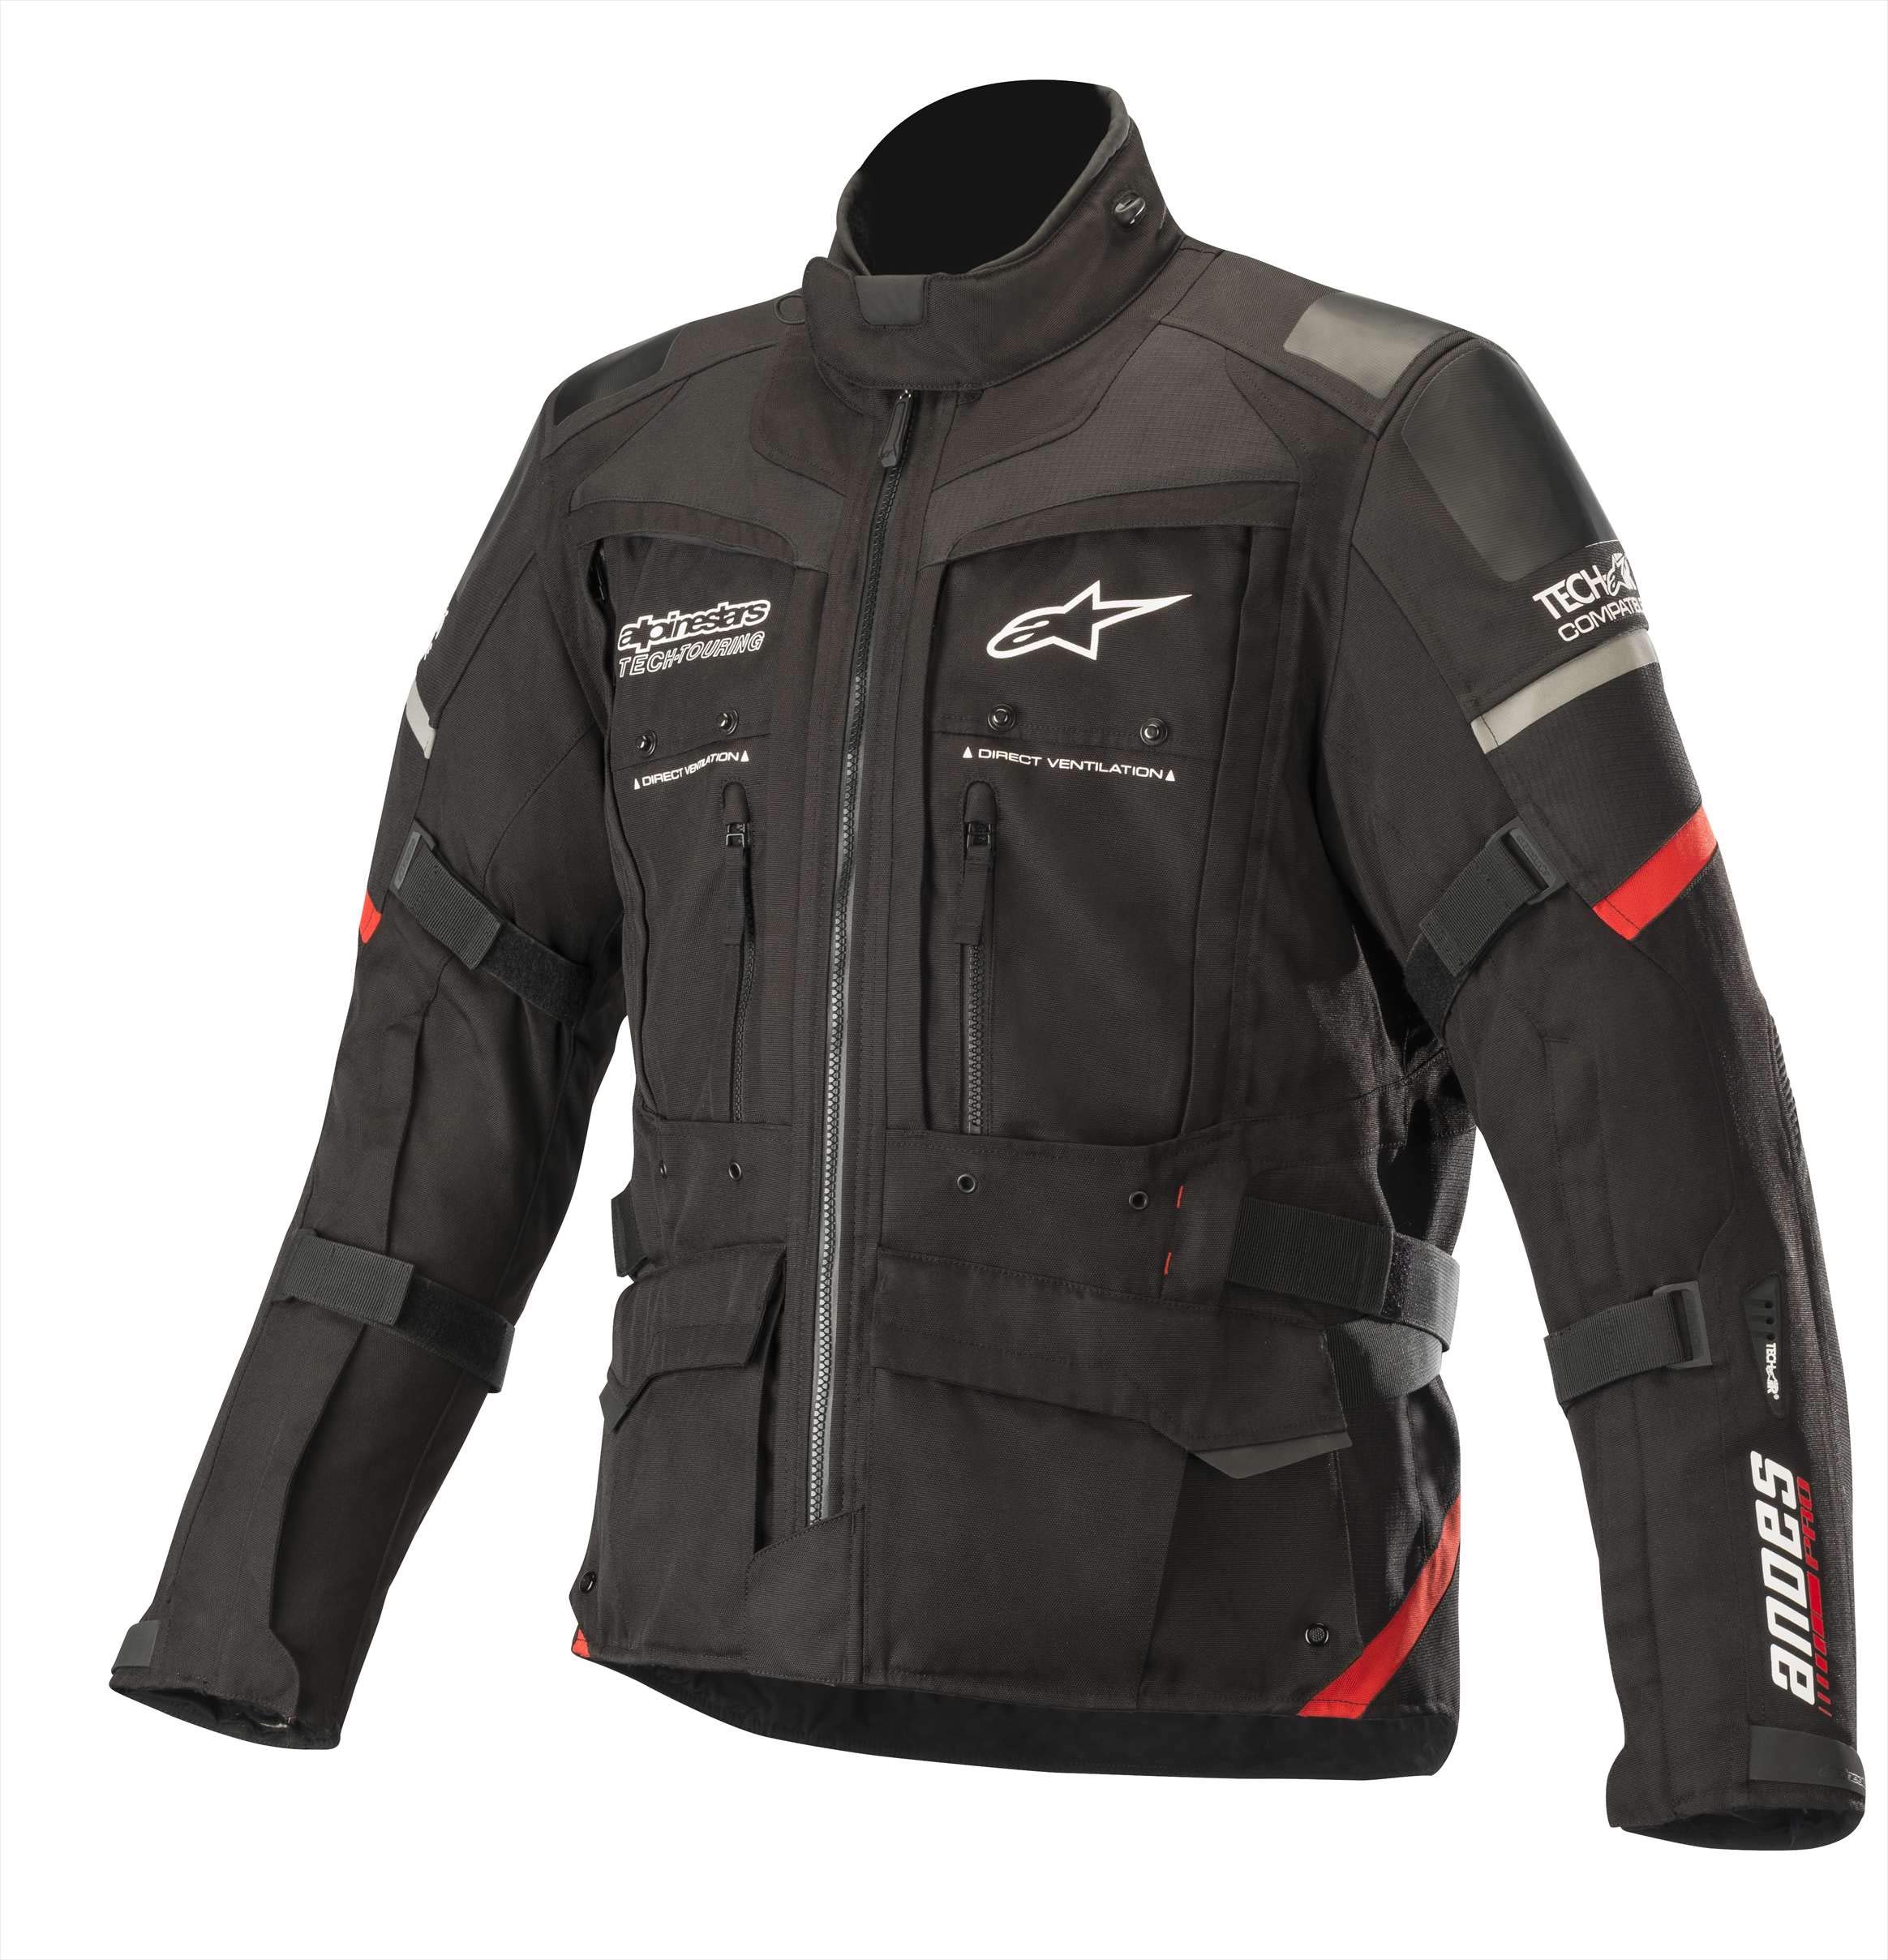 Alpinestars Men's Andes Pro Drystar Waterpoof All-Weather Touring Motorcycle Jacket Tech-Air Compatible, Black/Red, Large